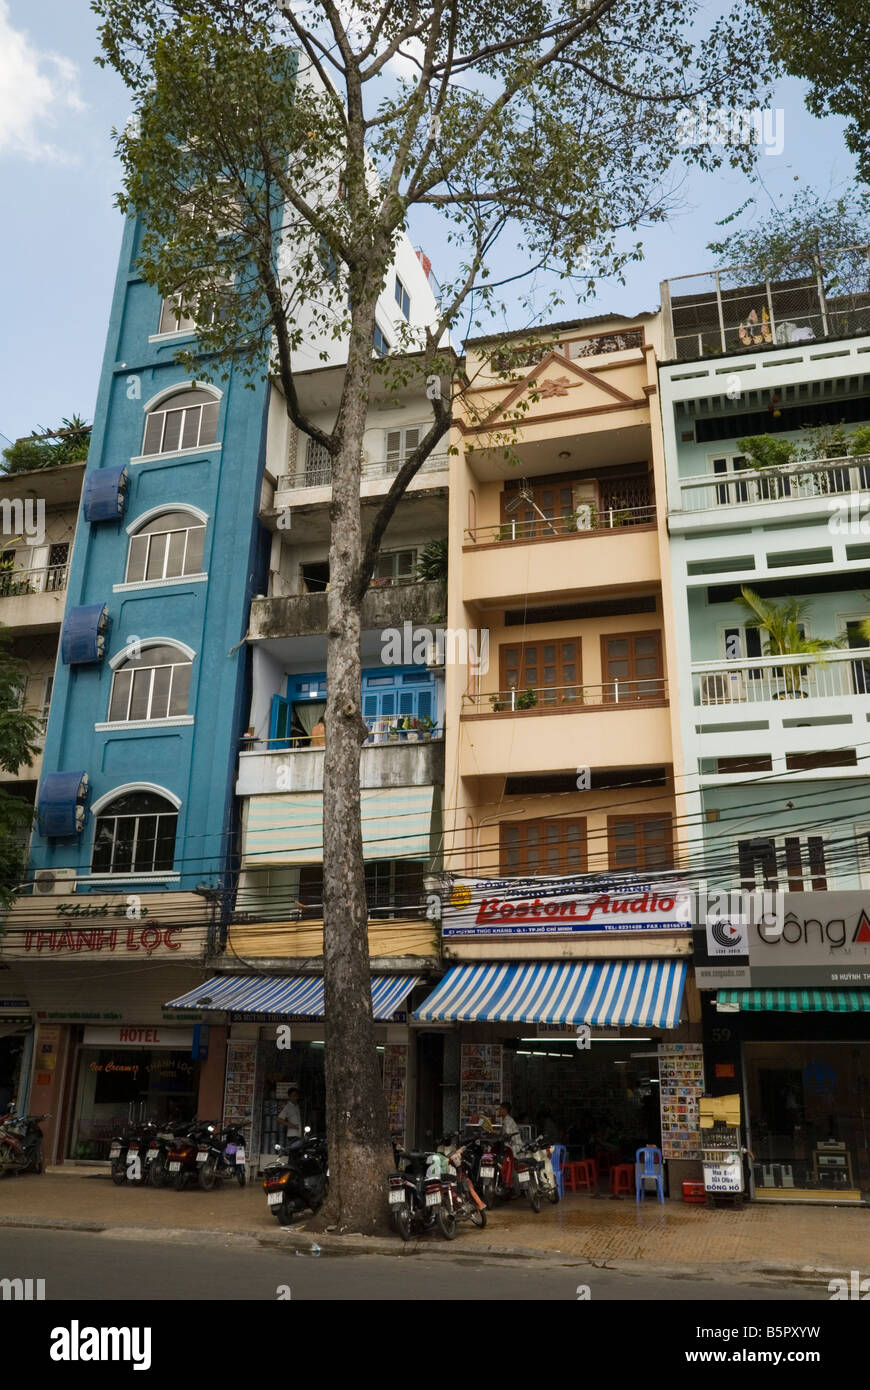 Narrow buildings with ground floor shops in Ho Chi Minh City, Vietnam Stock Photo